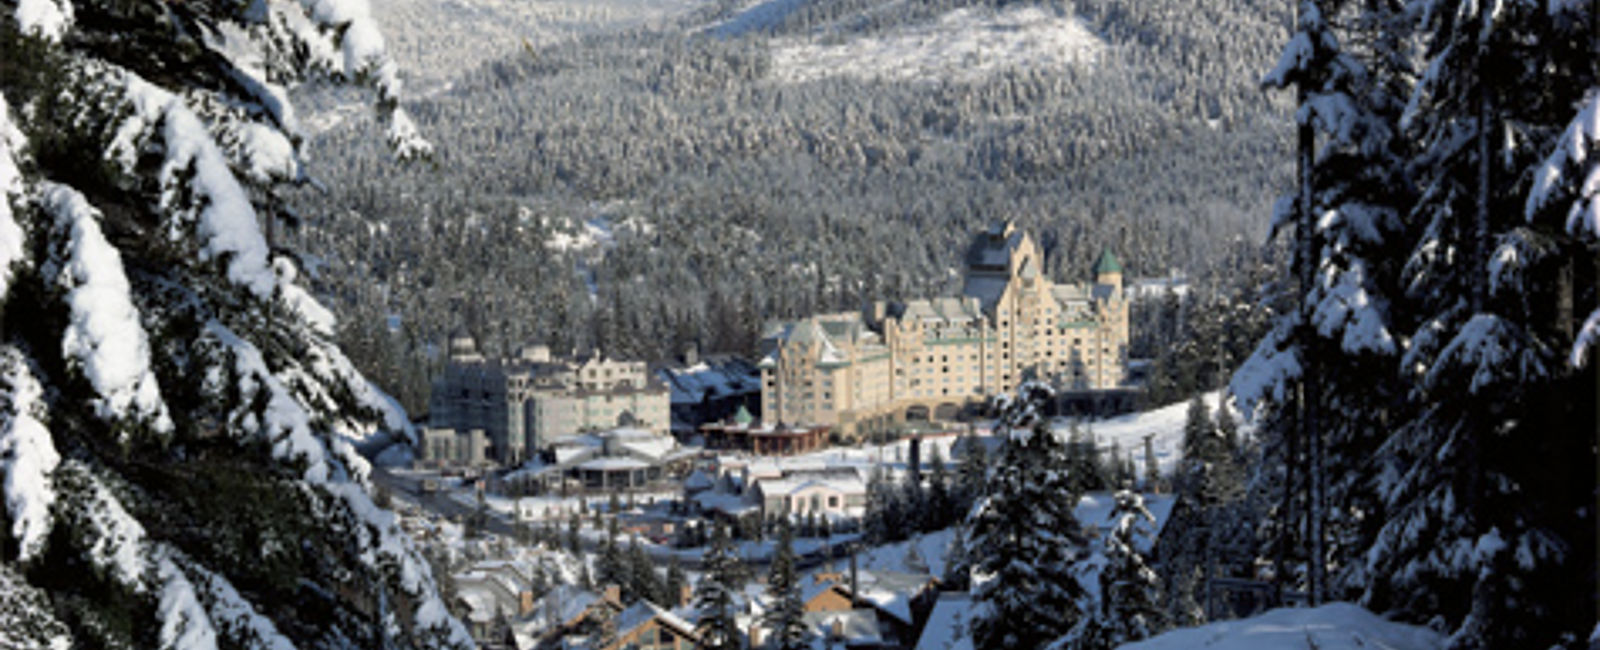 HOTELTEST
 The Fairmont Chateau Whistler 
 Fairmont Chateau Whistler 